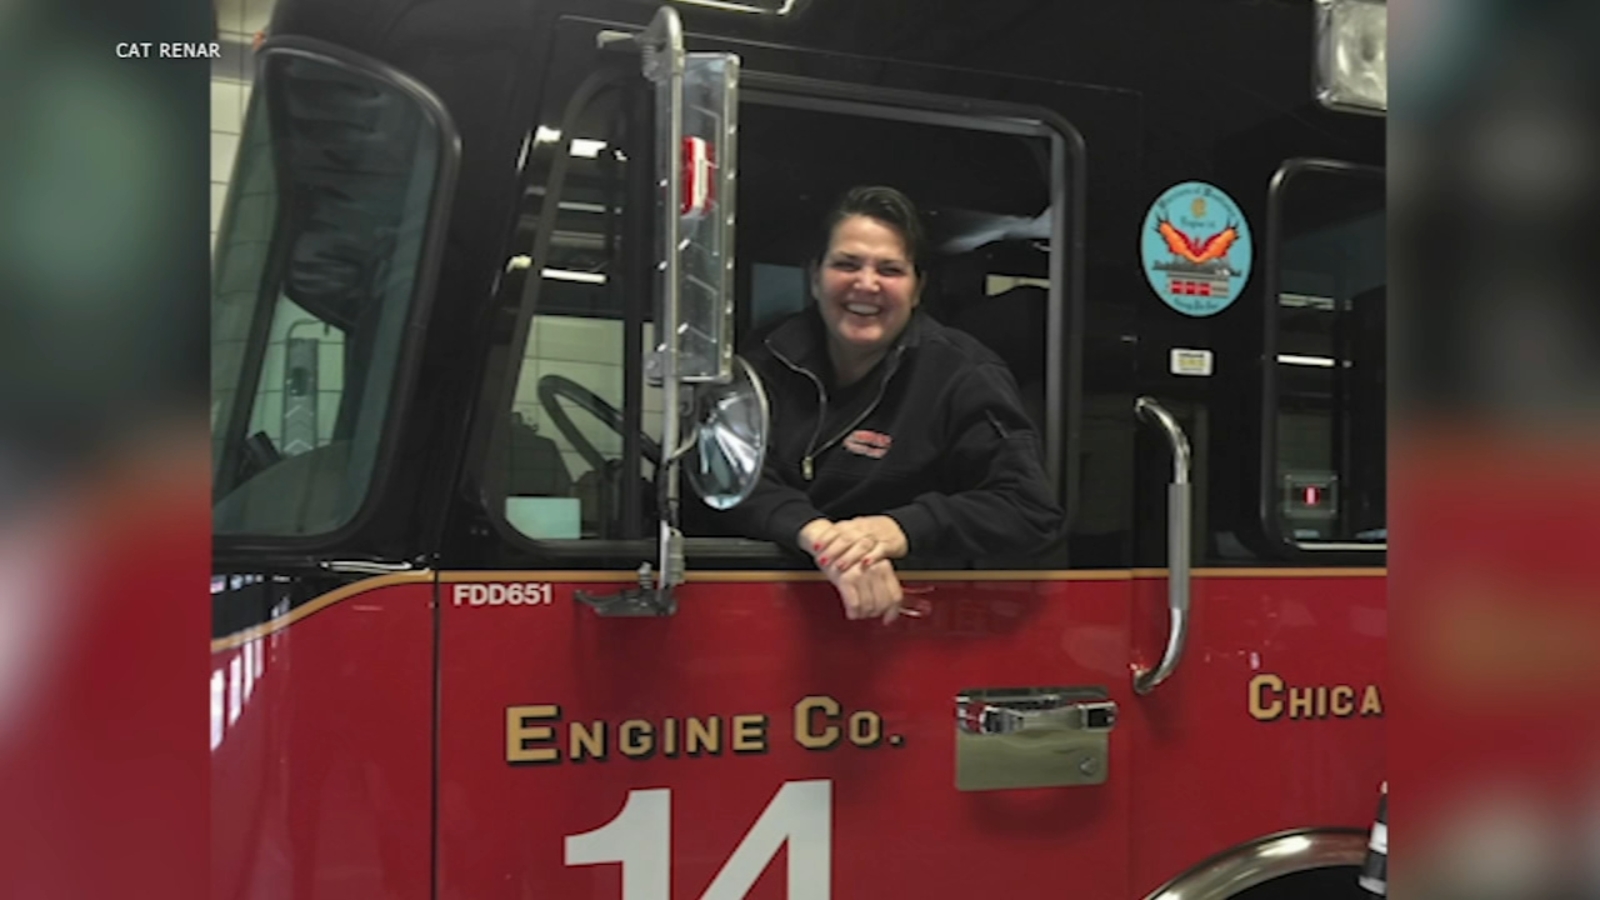 Retired CFD firefighter, Catherine ‘Cat’ Renar, details experience in ‘Chicago Strong: The Real Women of Chicago Fire’ [Video]